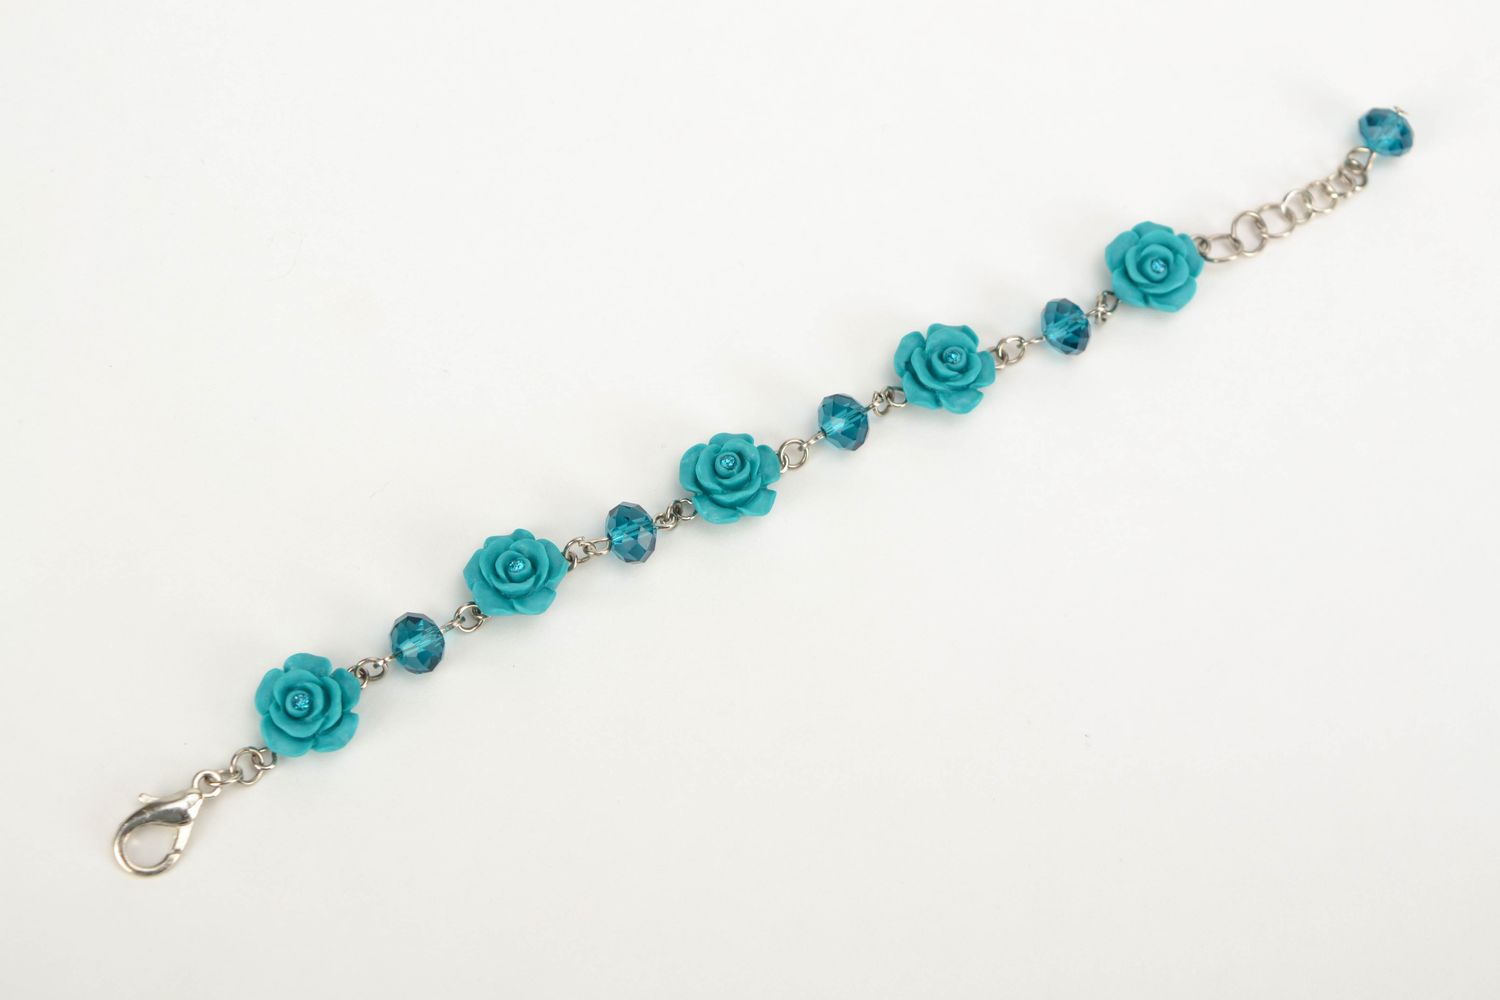 Polymer clay wrist bracelet with blue roses photo 4